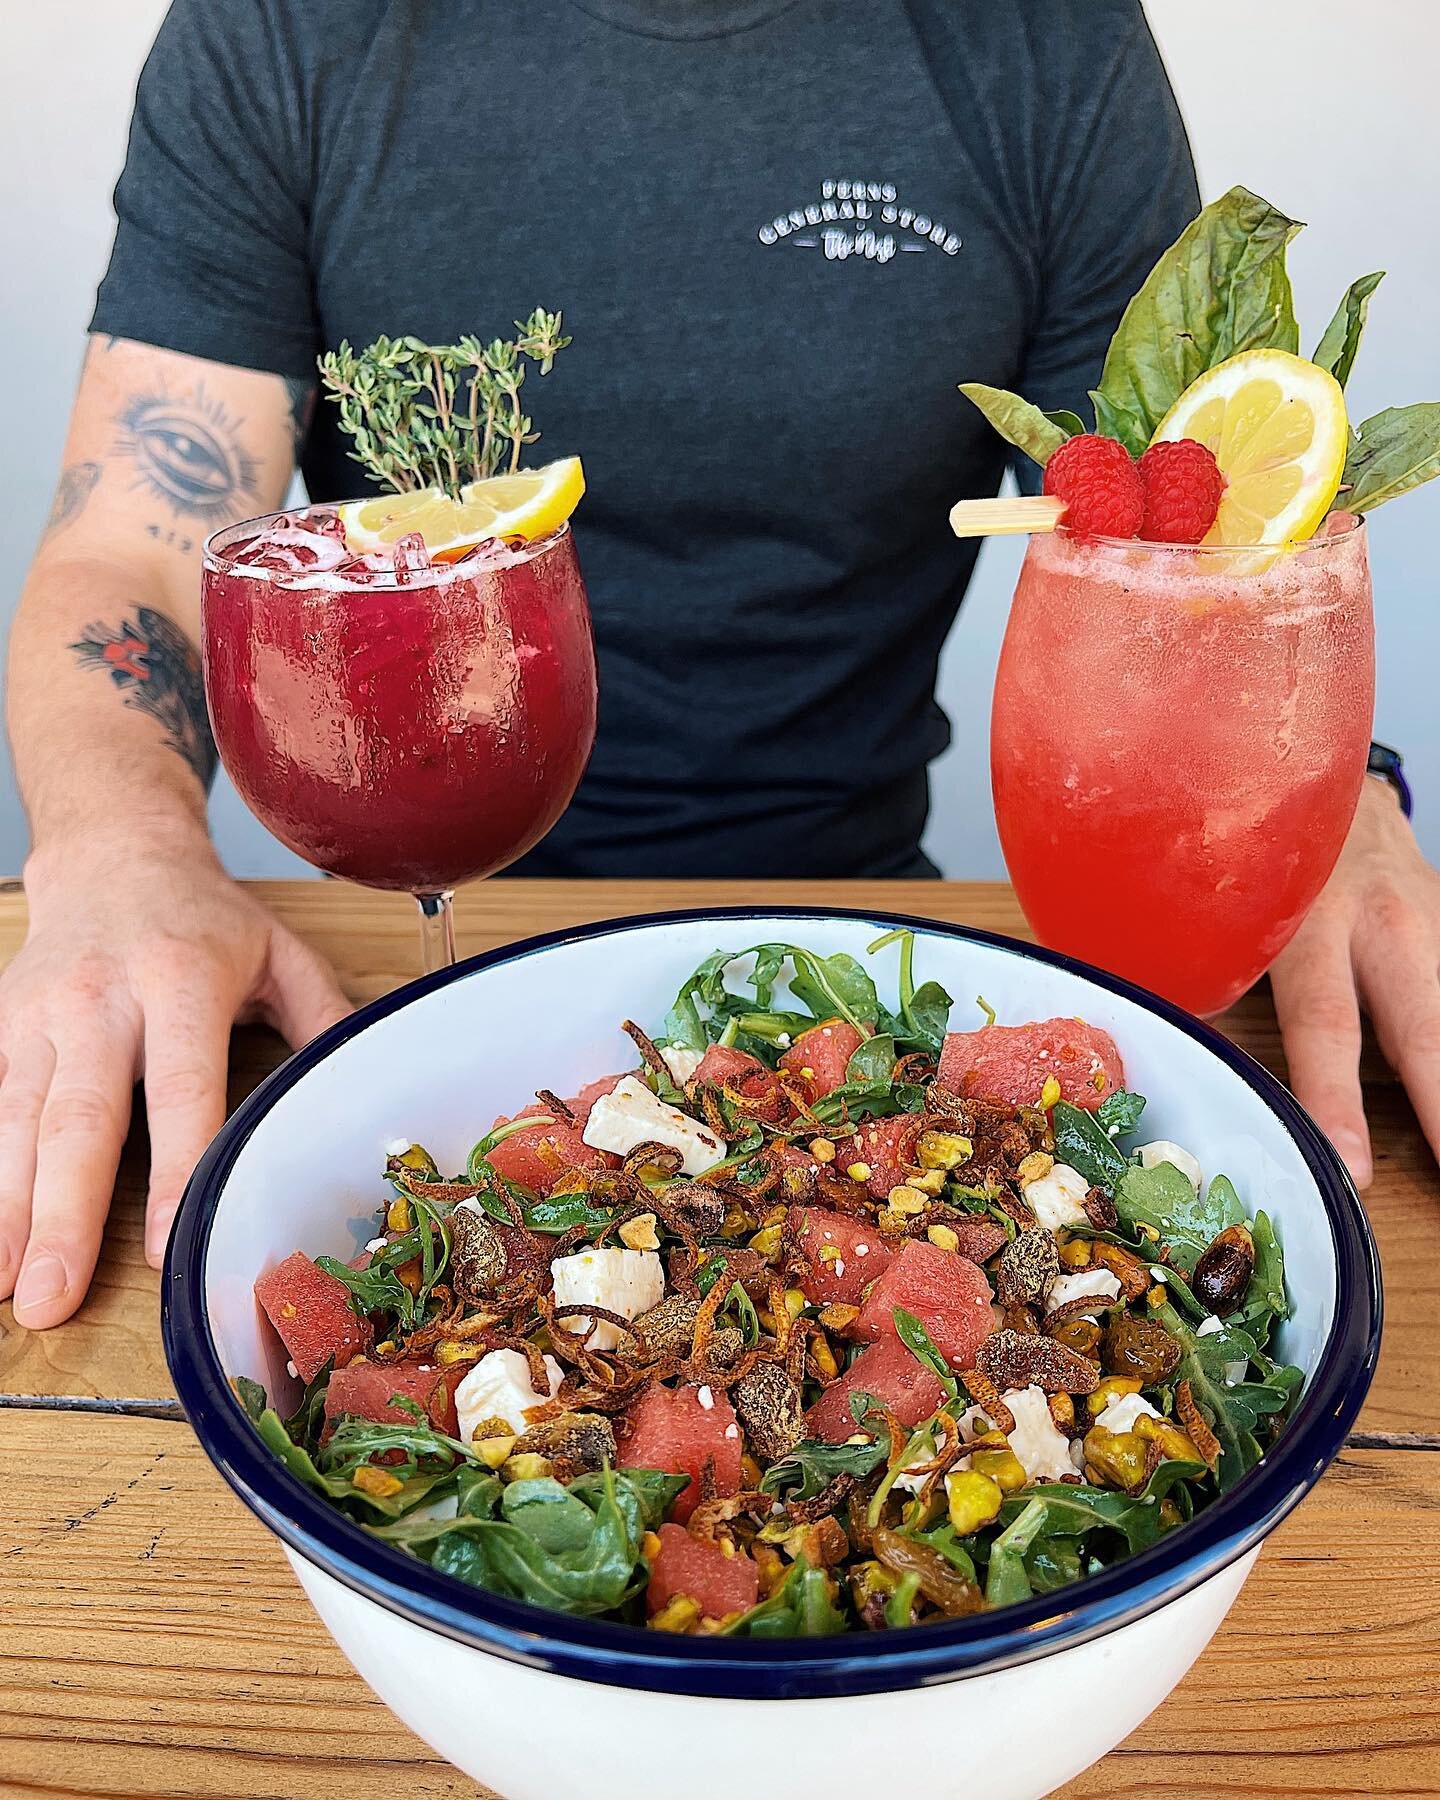 Come do a red, white &amp; moody blue cheers with us! 
4th of July hours will be 11-6 🇺🇸

New salad pictured: watermelon &amp; arugula salad with pistachio, golden raisins, feta, crispy meyer lemon peel, white balsamic + chili vinaigrette 

&bull; 